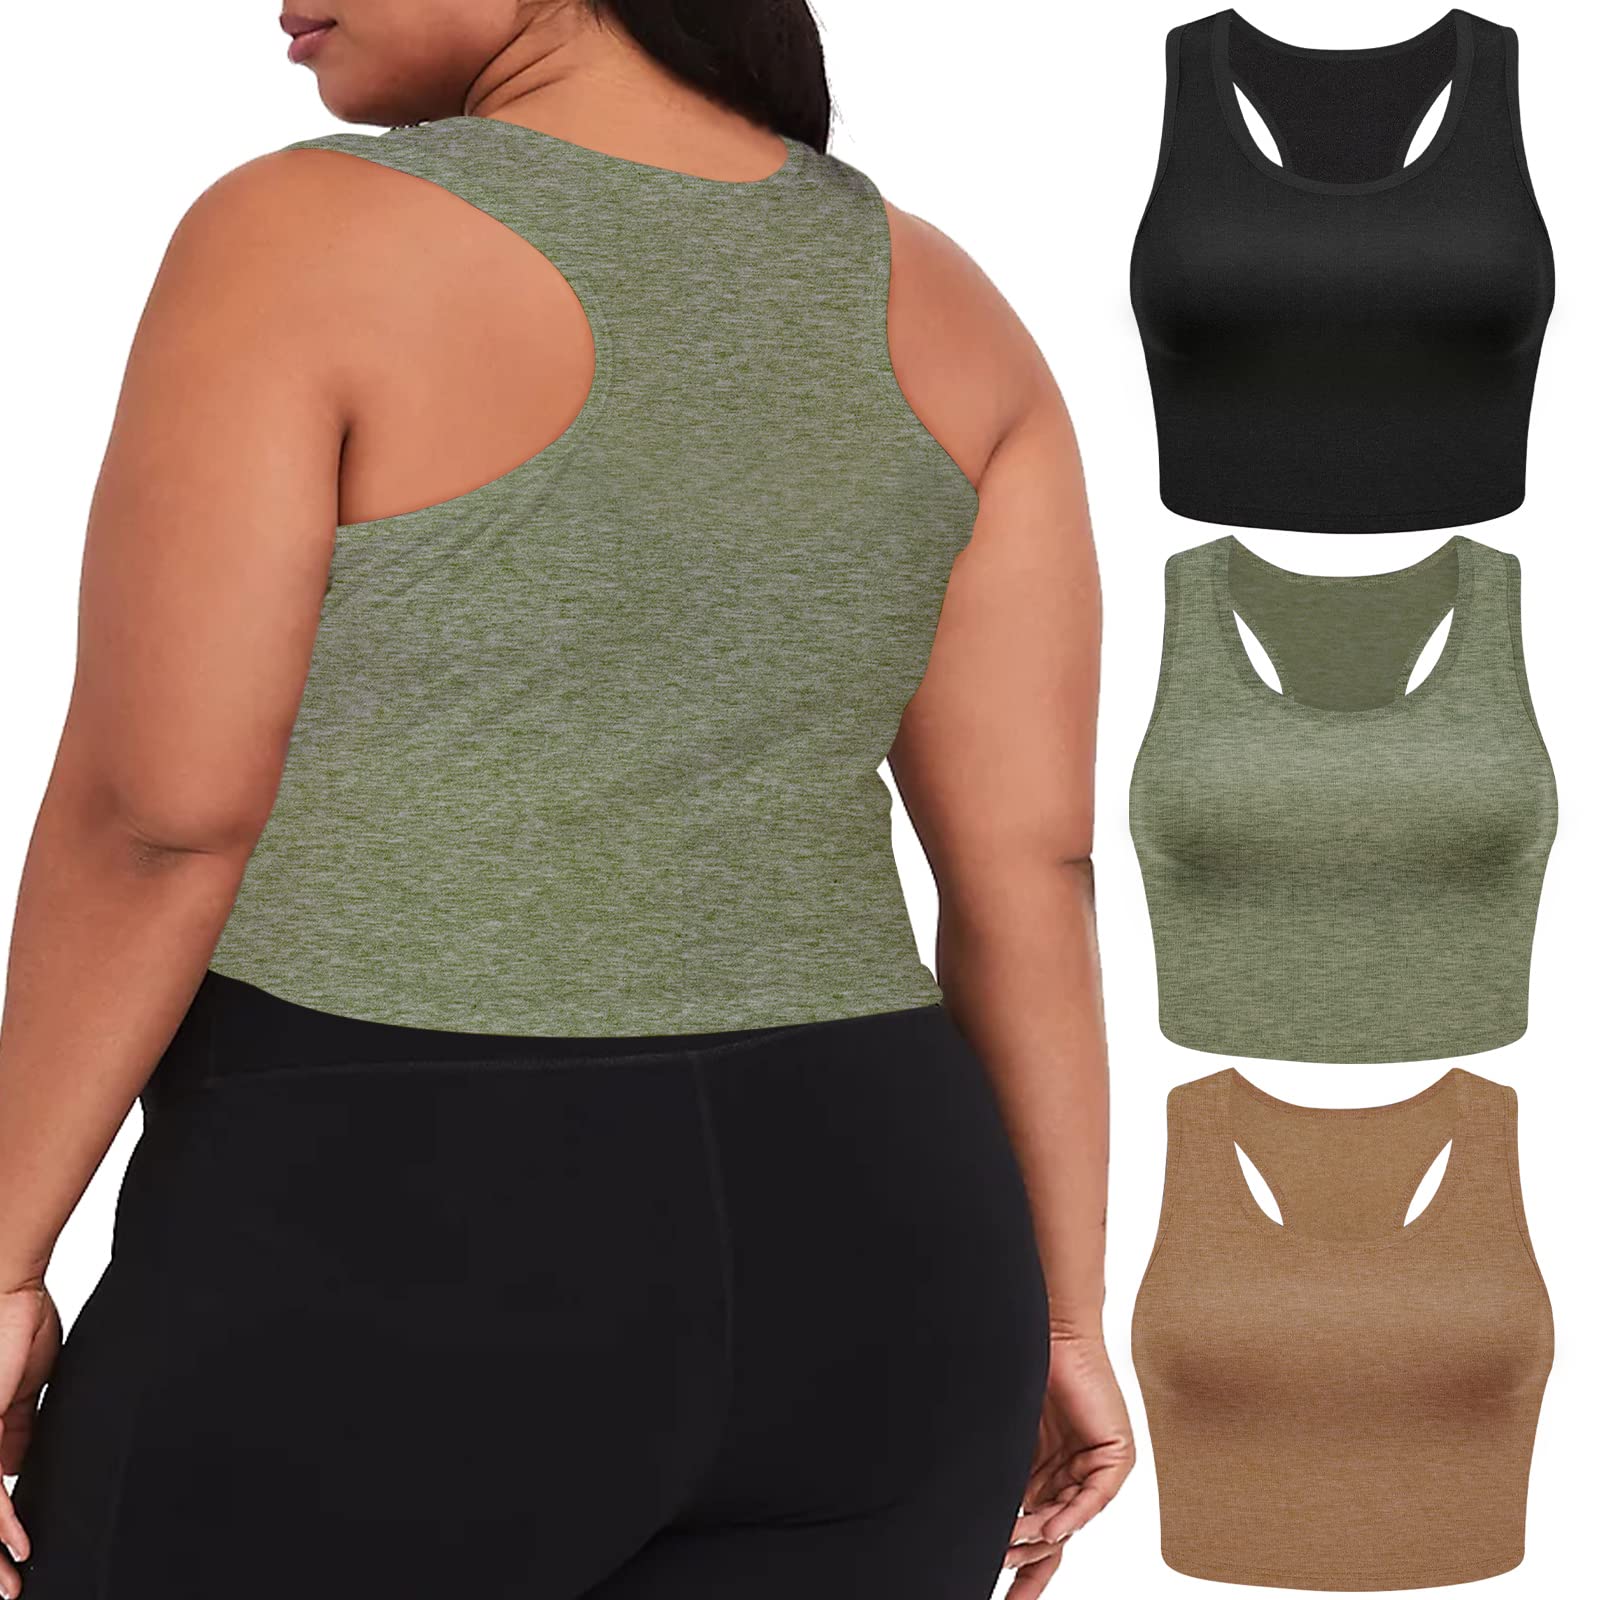 3 Pieces Basic Plus Size Tank Tops for Women-Black,Coffee,Army Green